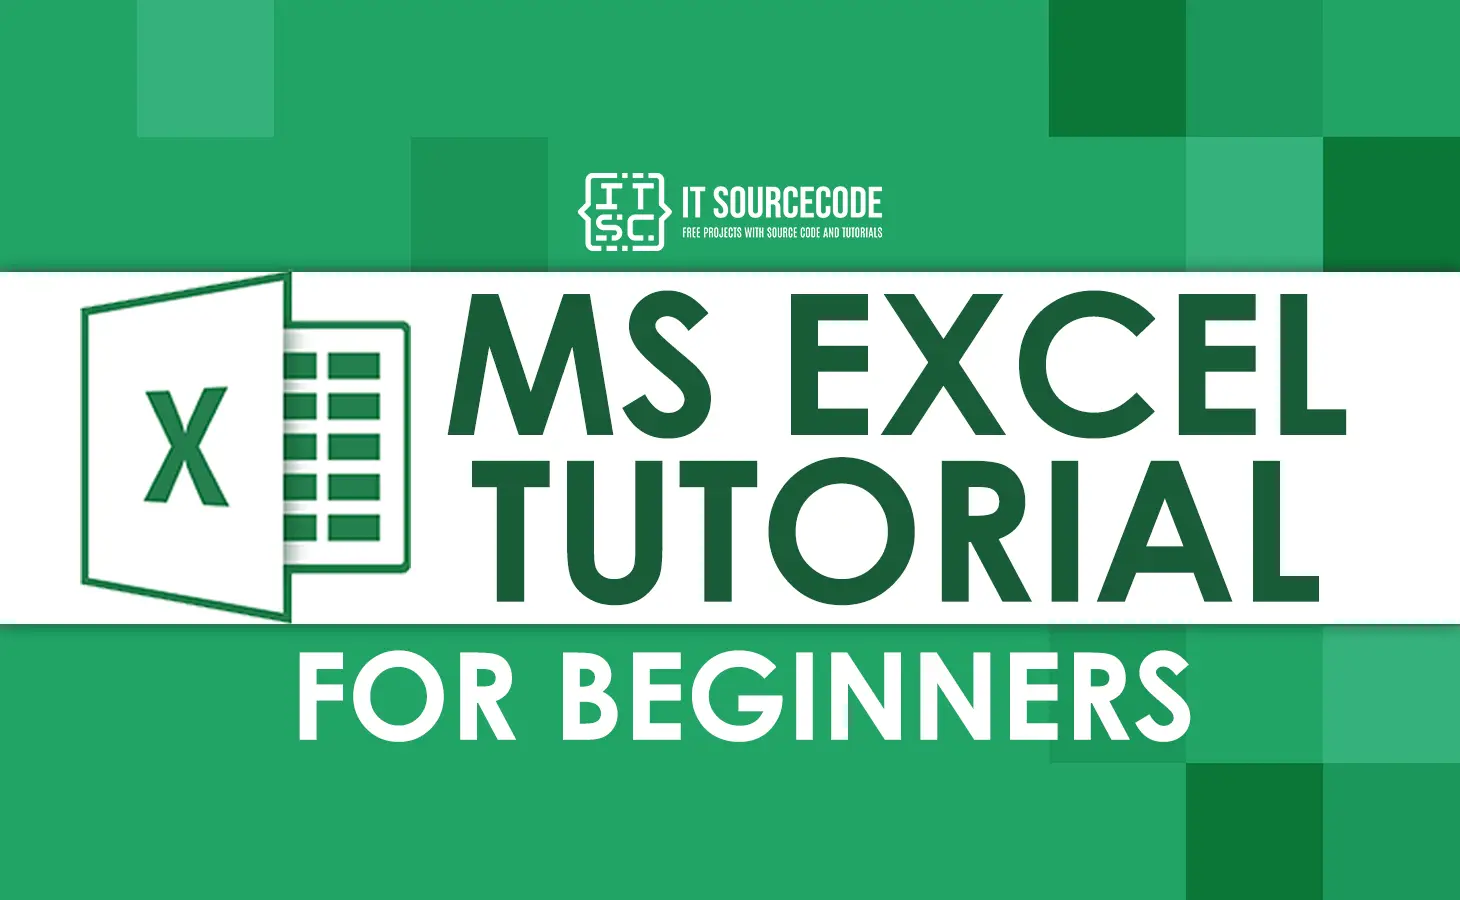 MS EXCEL Tutorial for Beginners copy